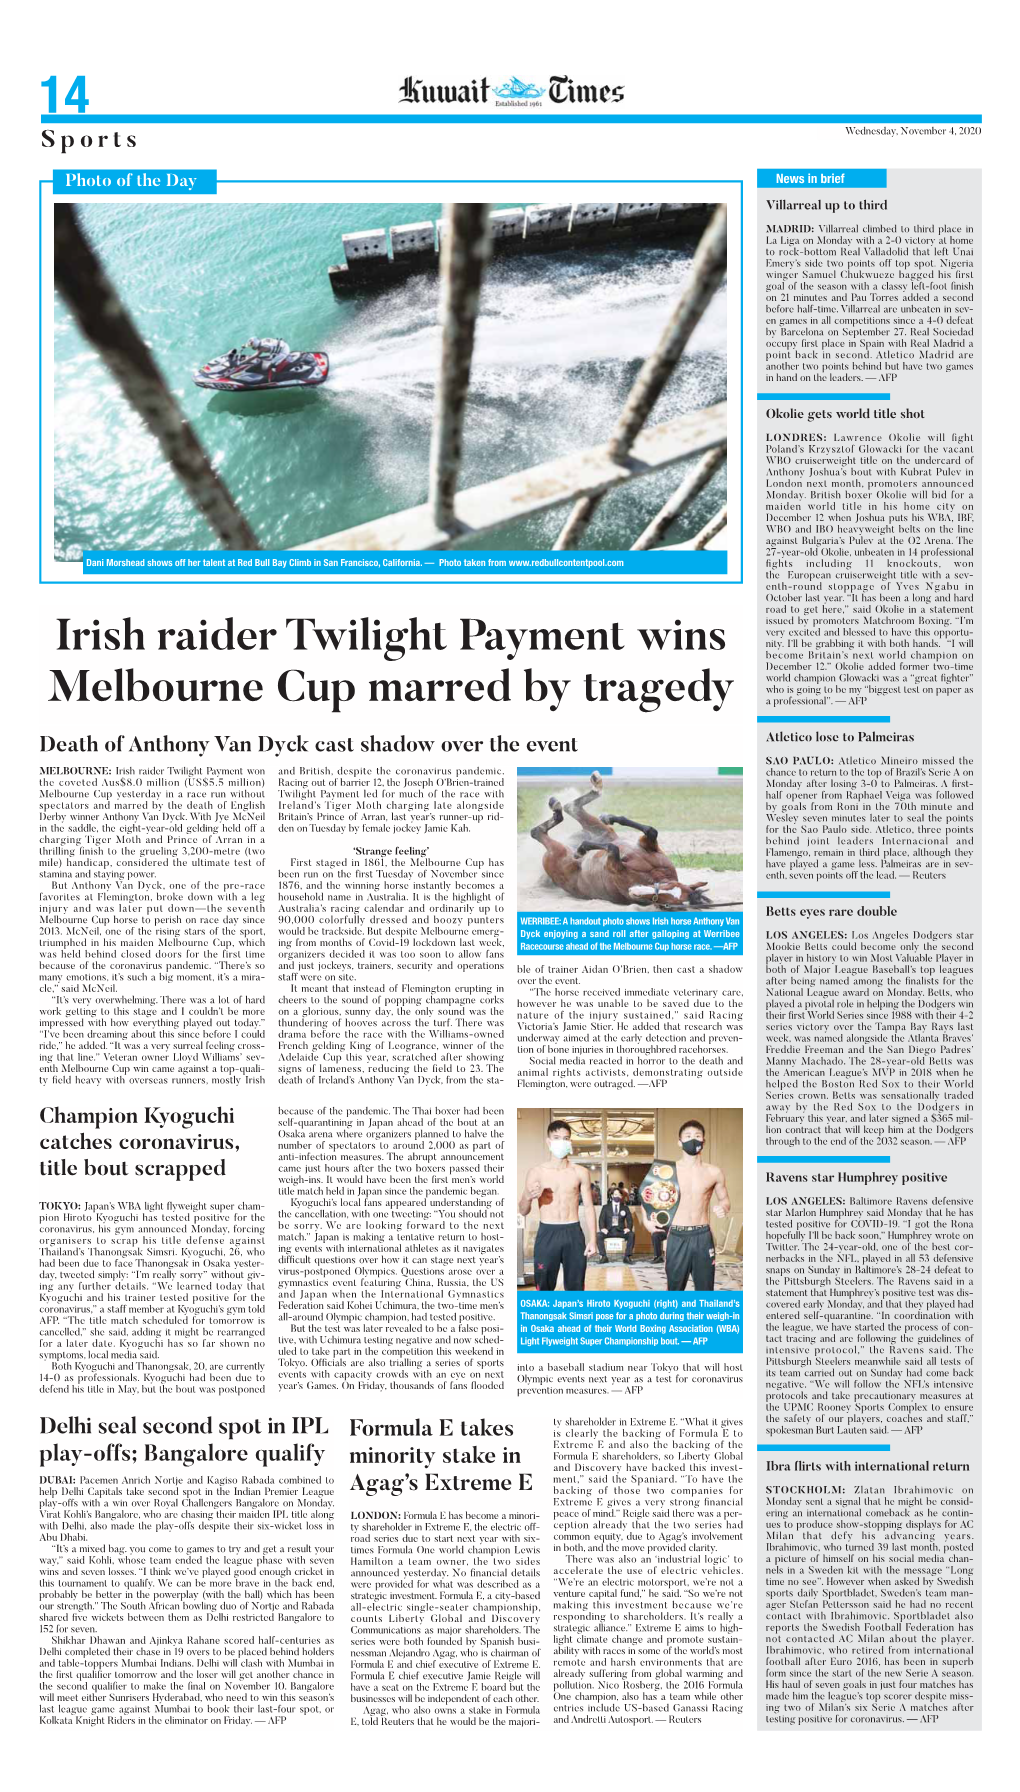 Irish Raider Twilight Payment Wins Melbourne Cup Marred by Tragedy